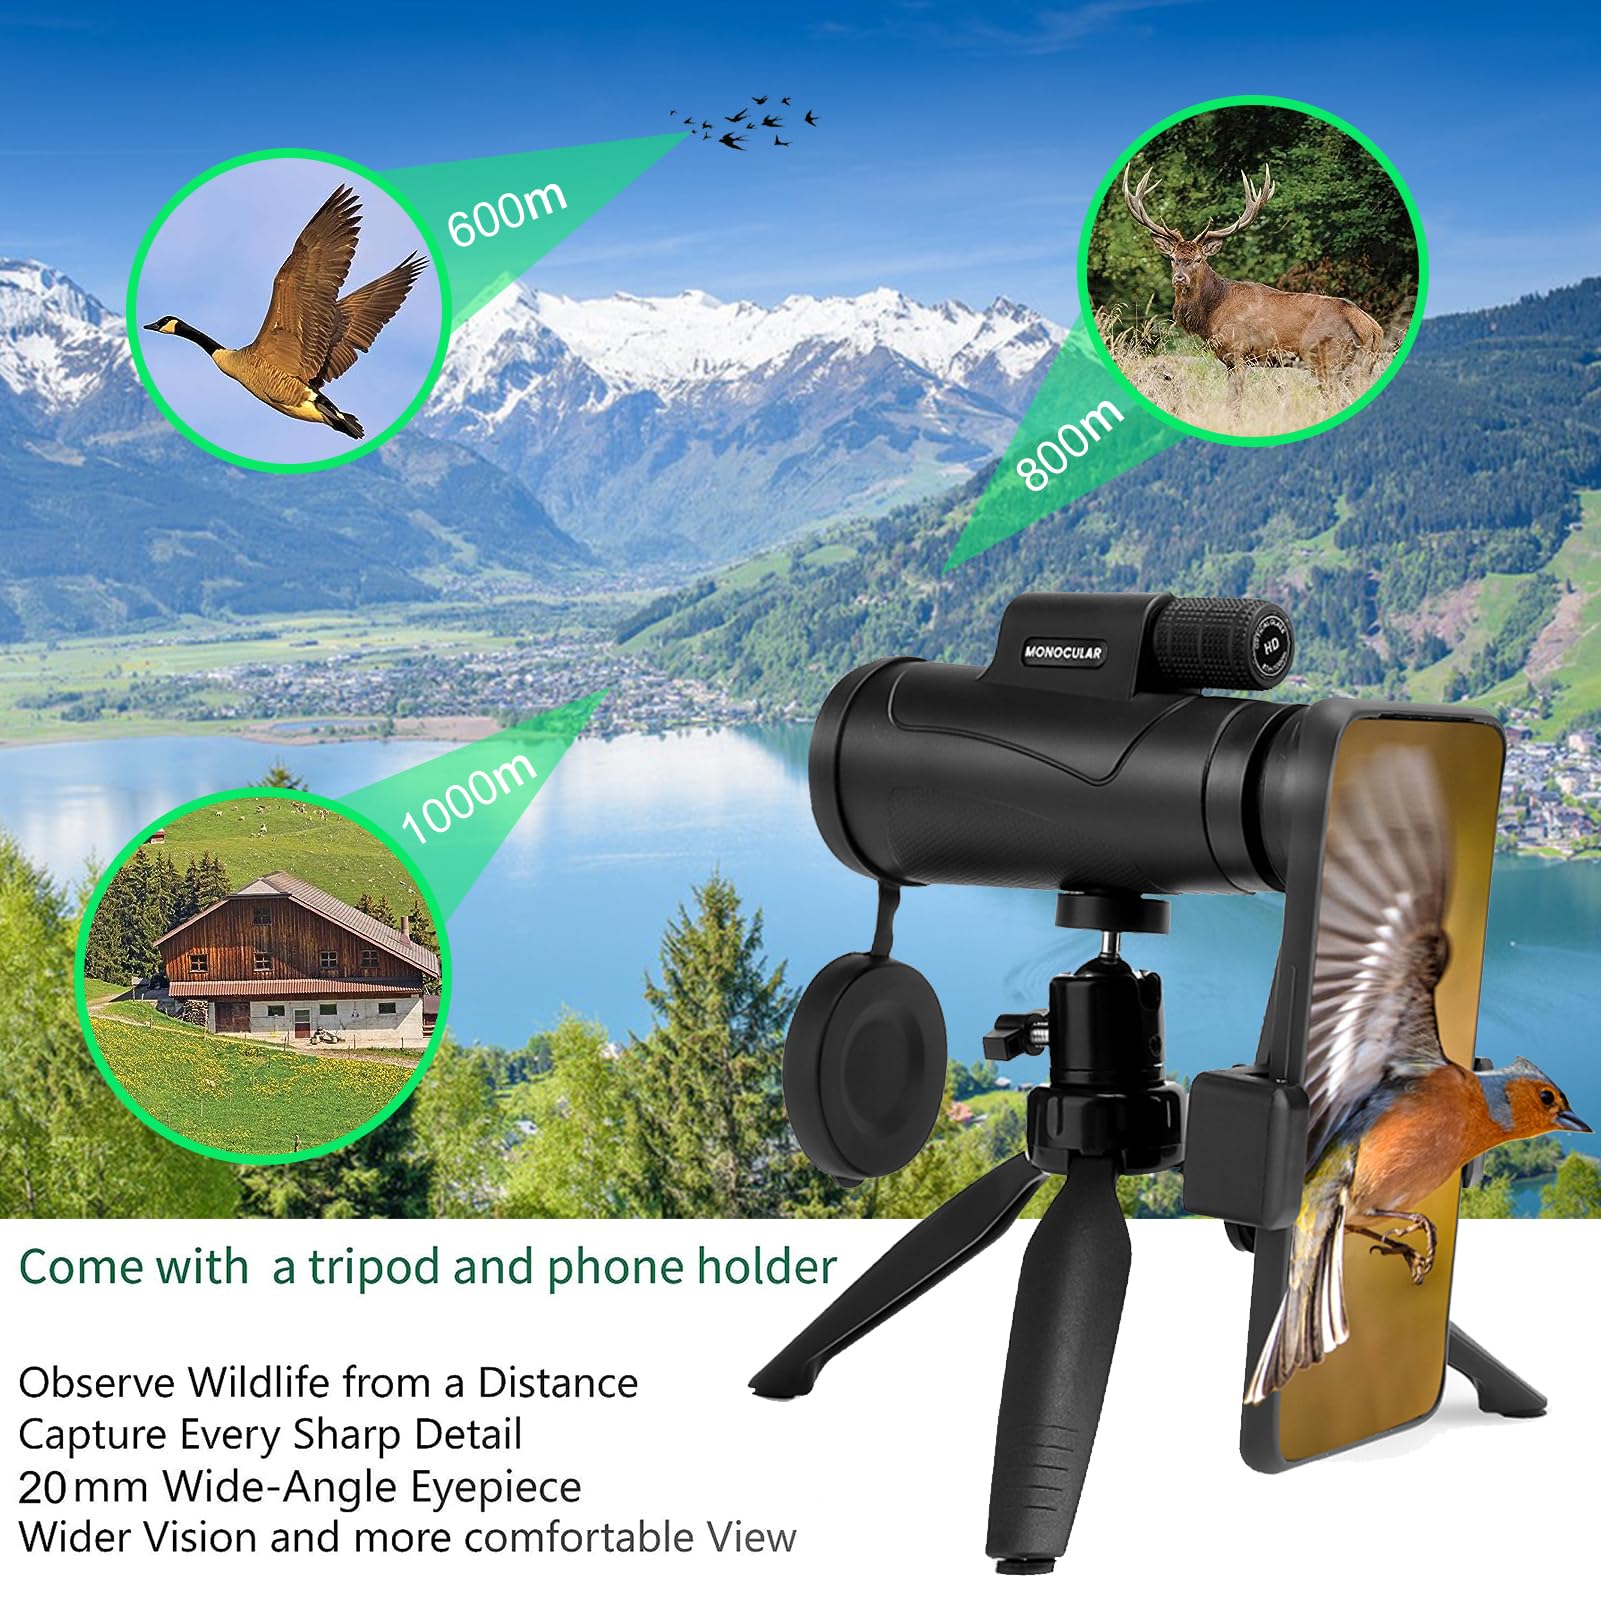 80x100 HD Monoculars Telescope for Adults High Powered with Smartphone Tripod & BAK4 Prism for Birdwatching/Hunting/Camping/Concert Travelling